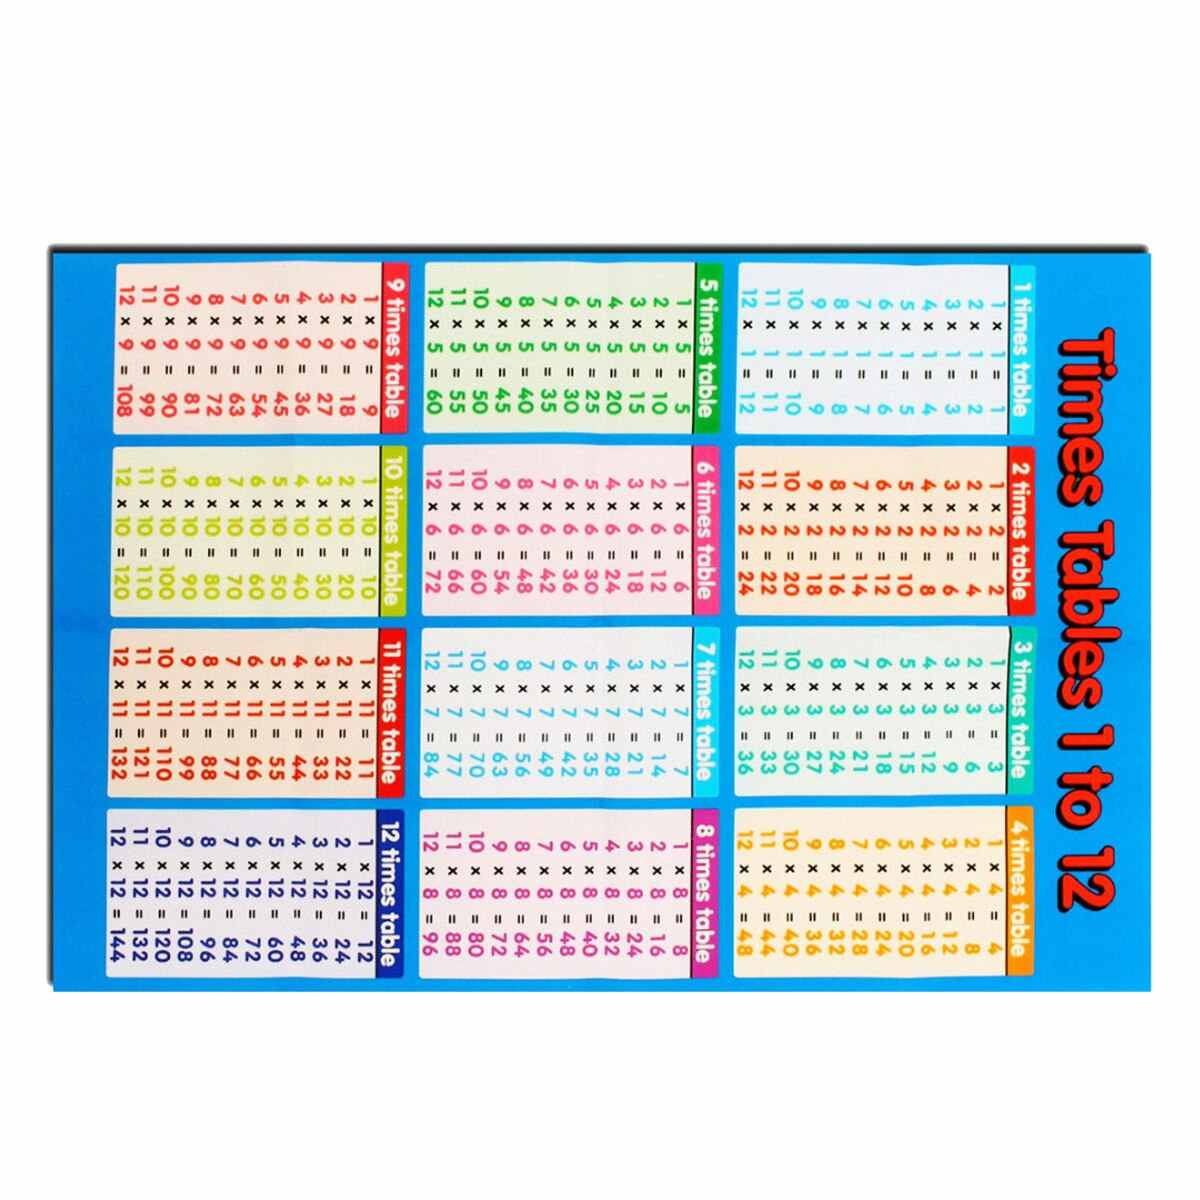 Multiplication Table Poster Wall Sticker Family Educational Times Tables  Math Children Poster Home Living Room Bedroom Decor